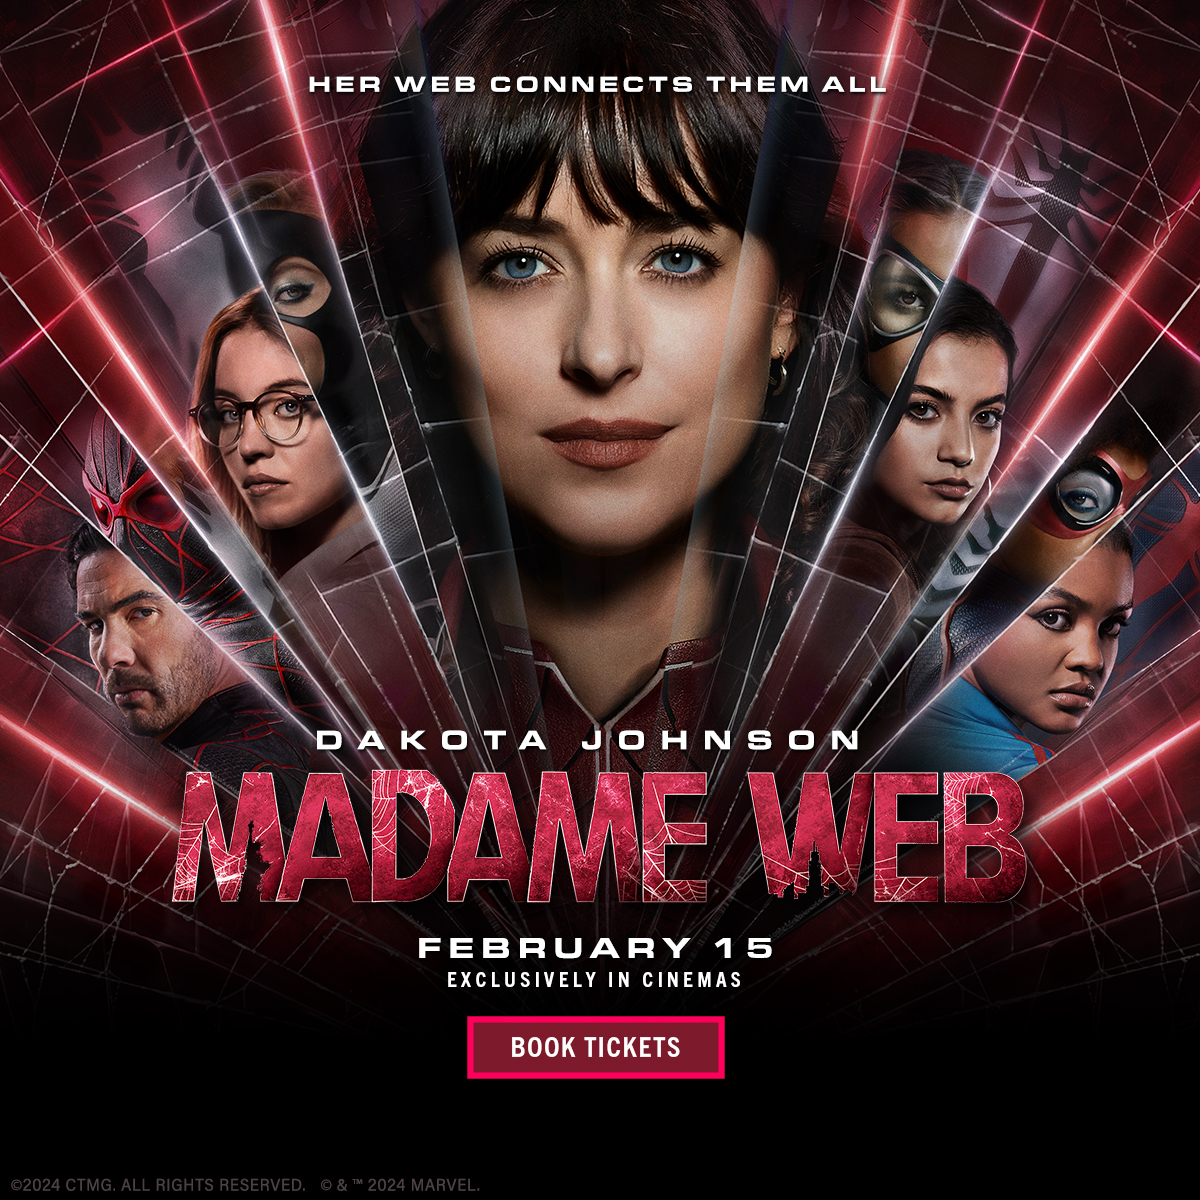 ‘Madame Web’ Heading For Disaster At Box Office